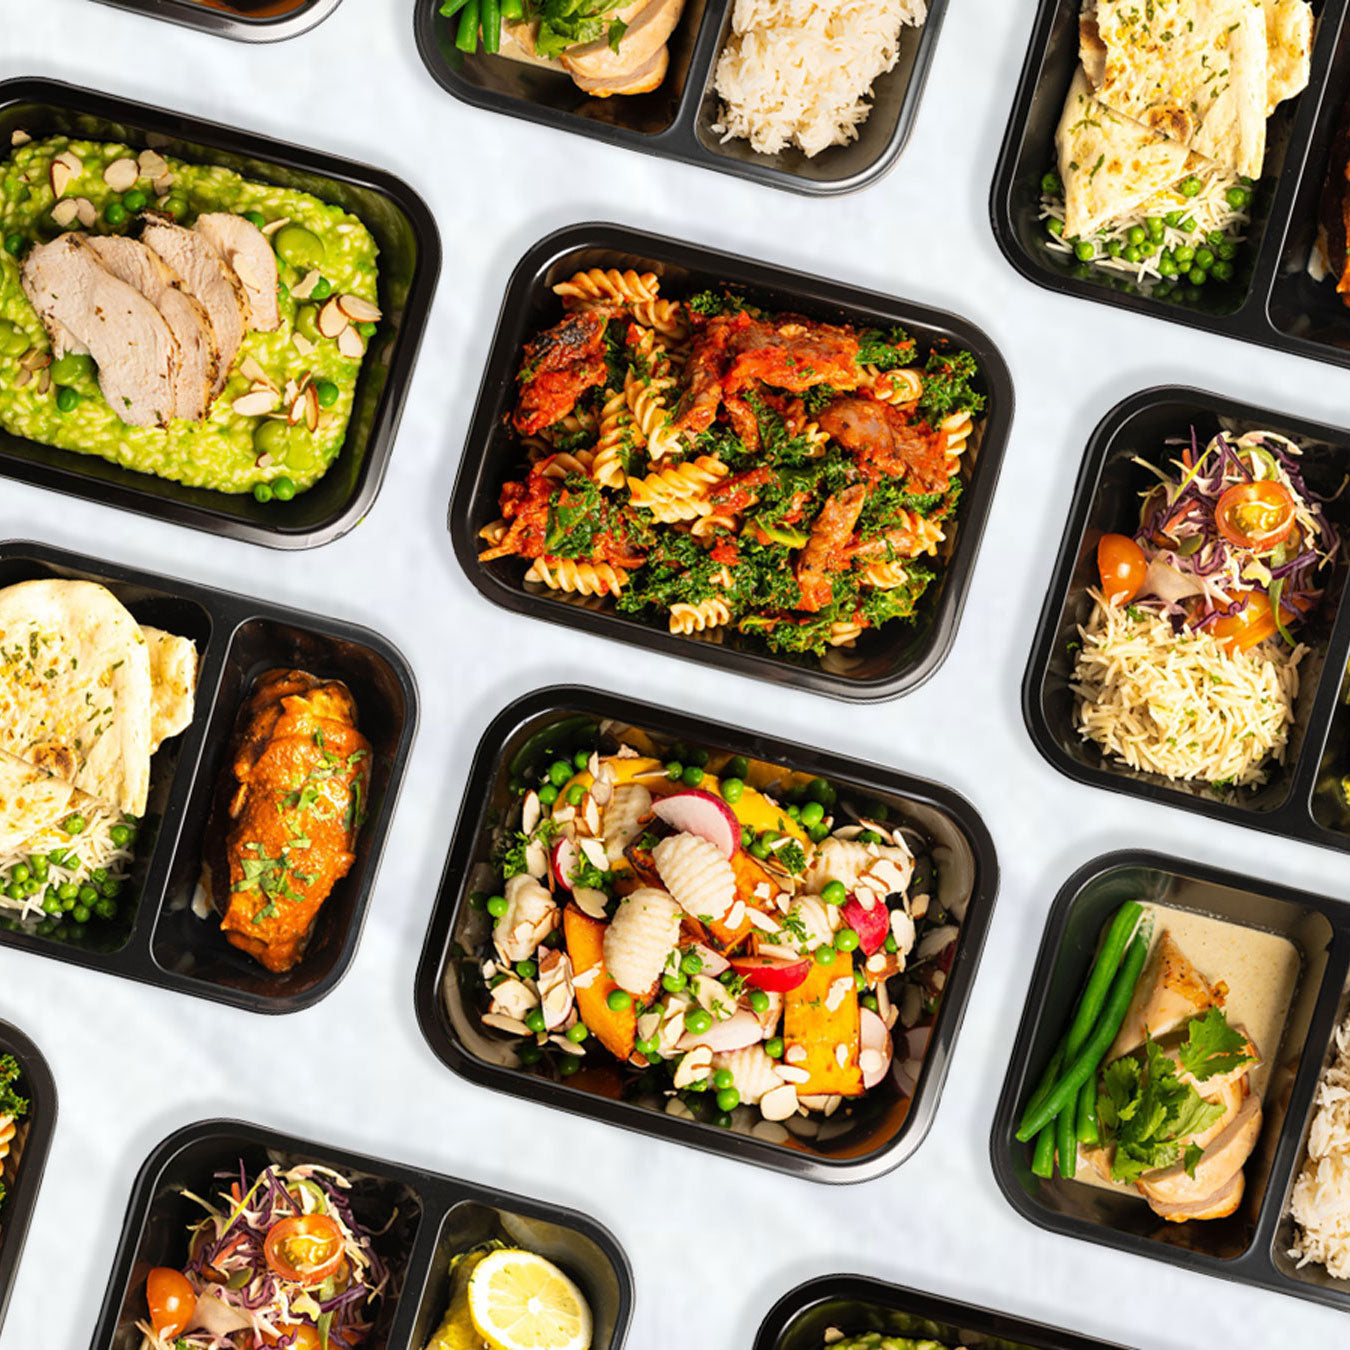 Change up your routine with Fitfood meal packs